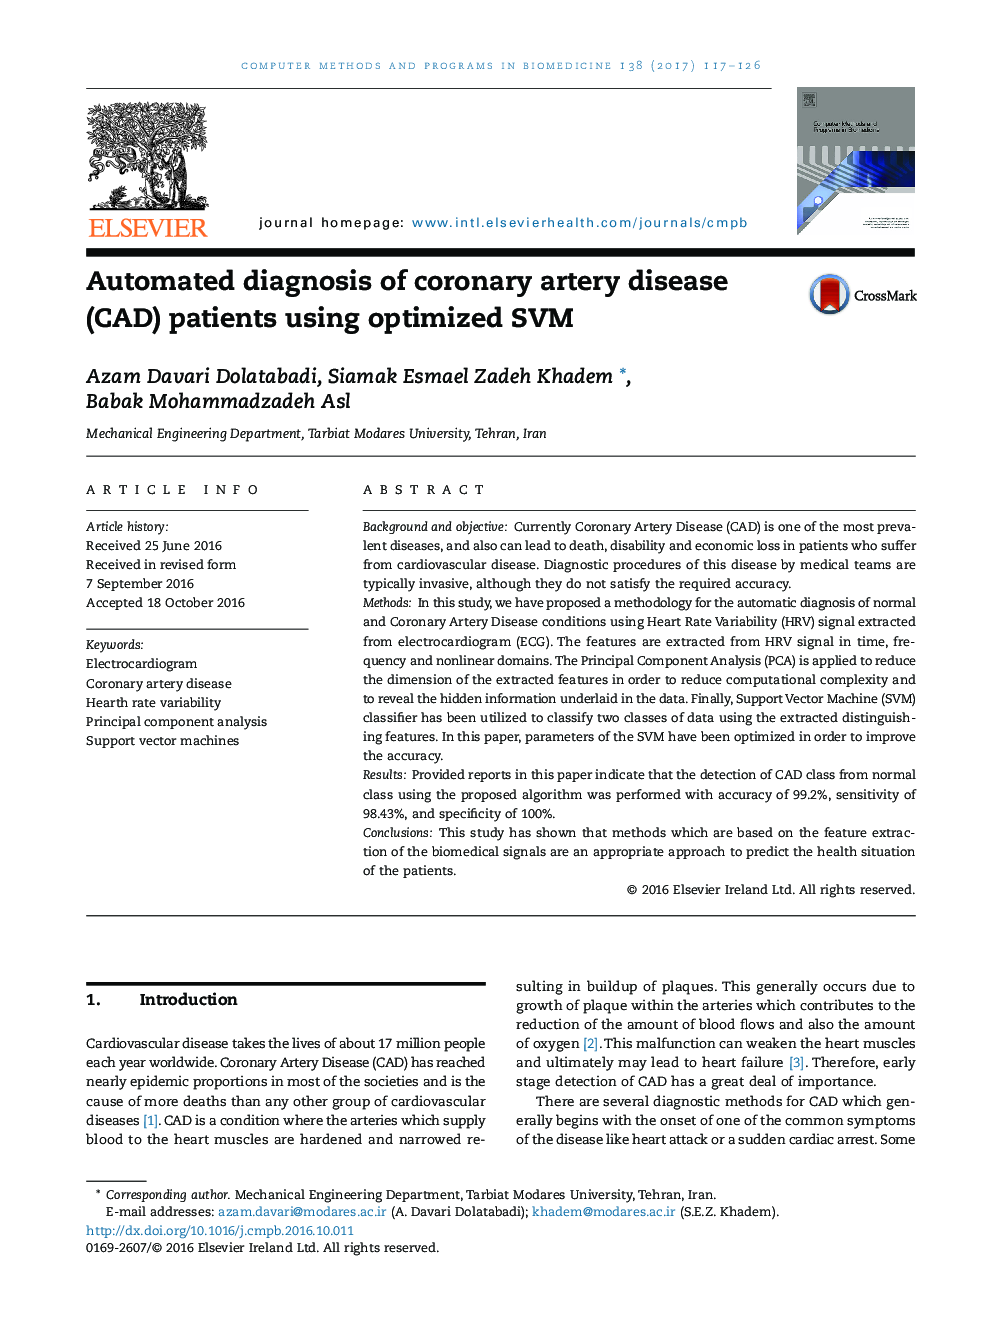 Automated diagnosis of coronary artery disease (CAD) patients using optimized SVM